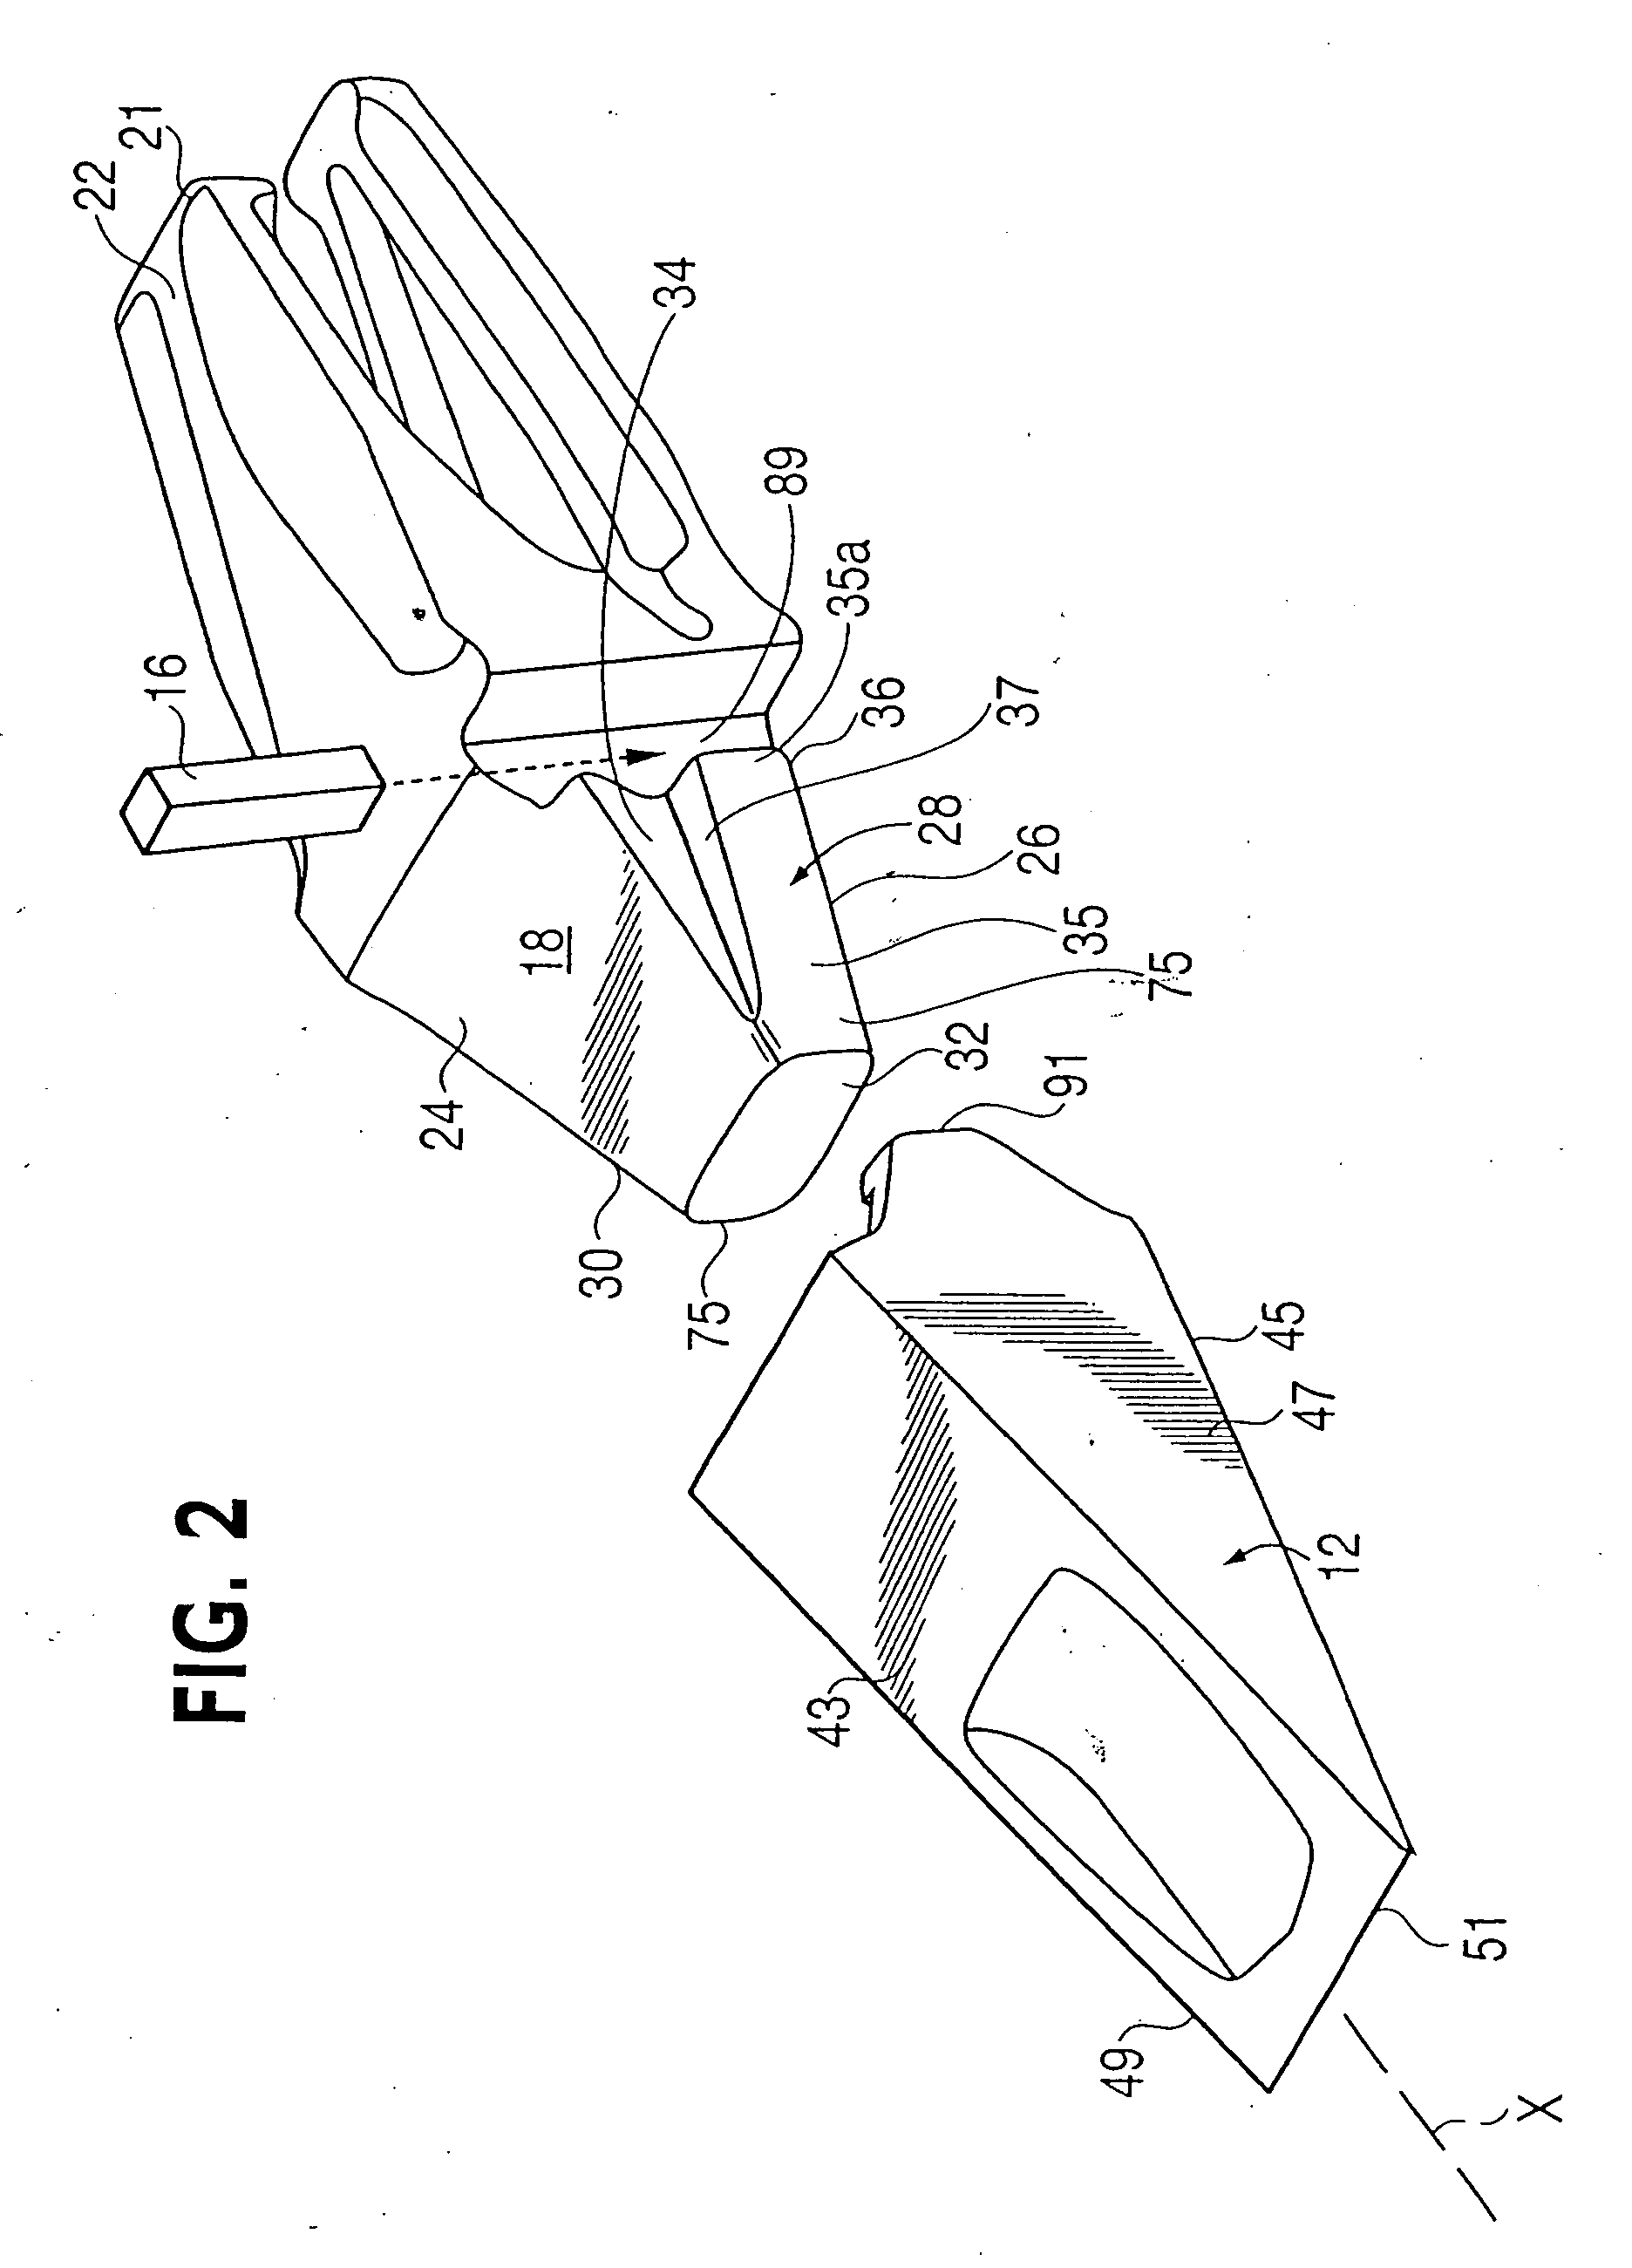 Point and adapter assembly